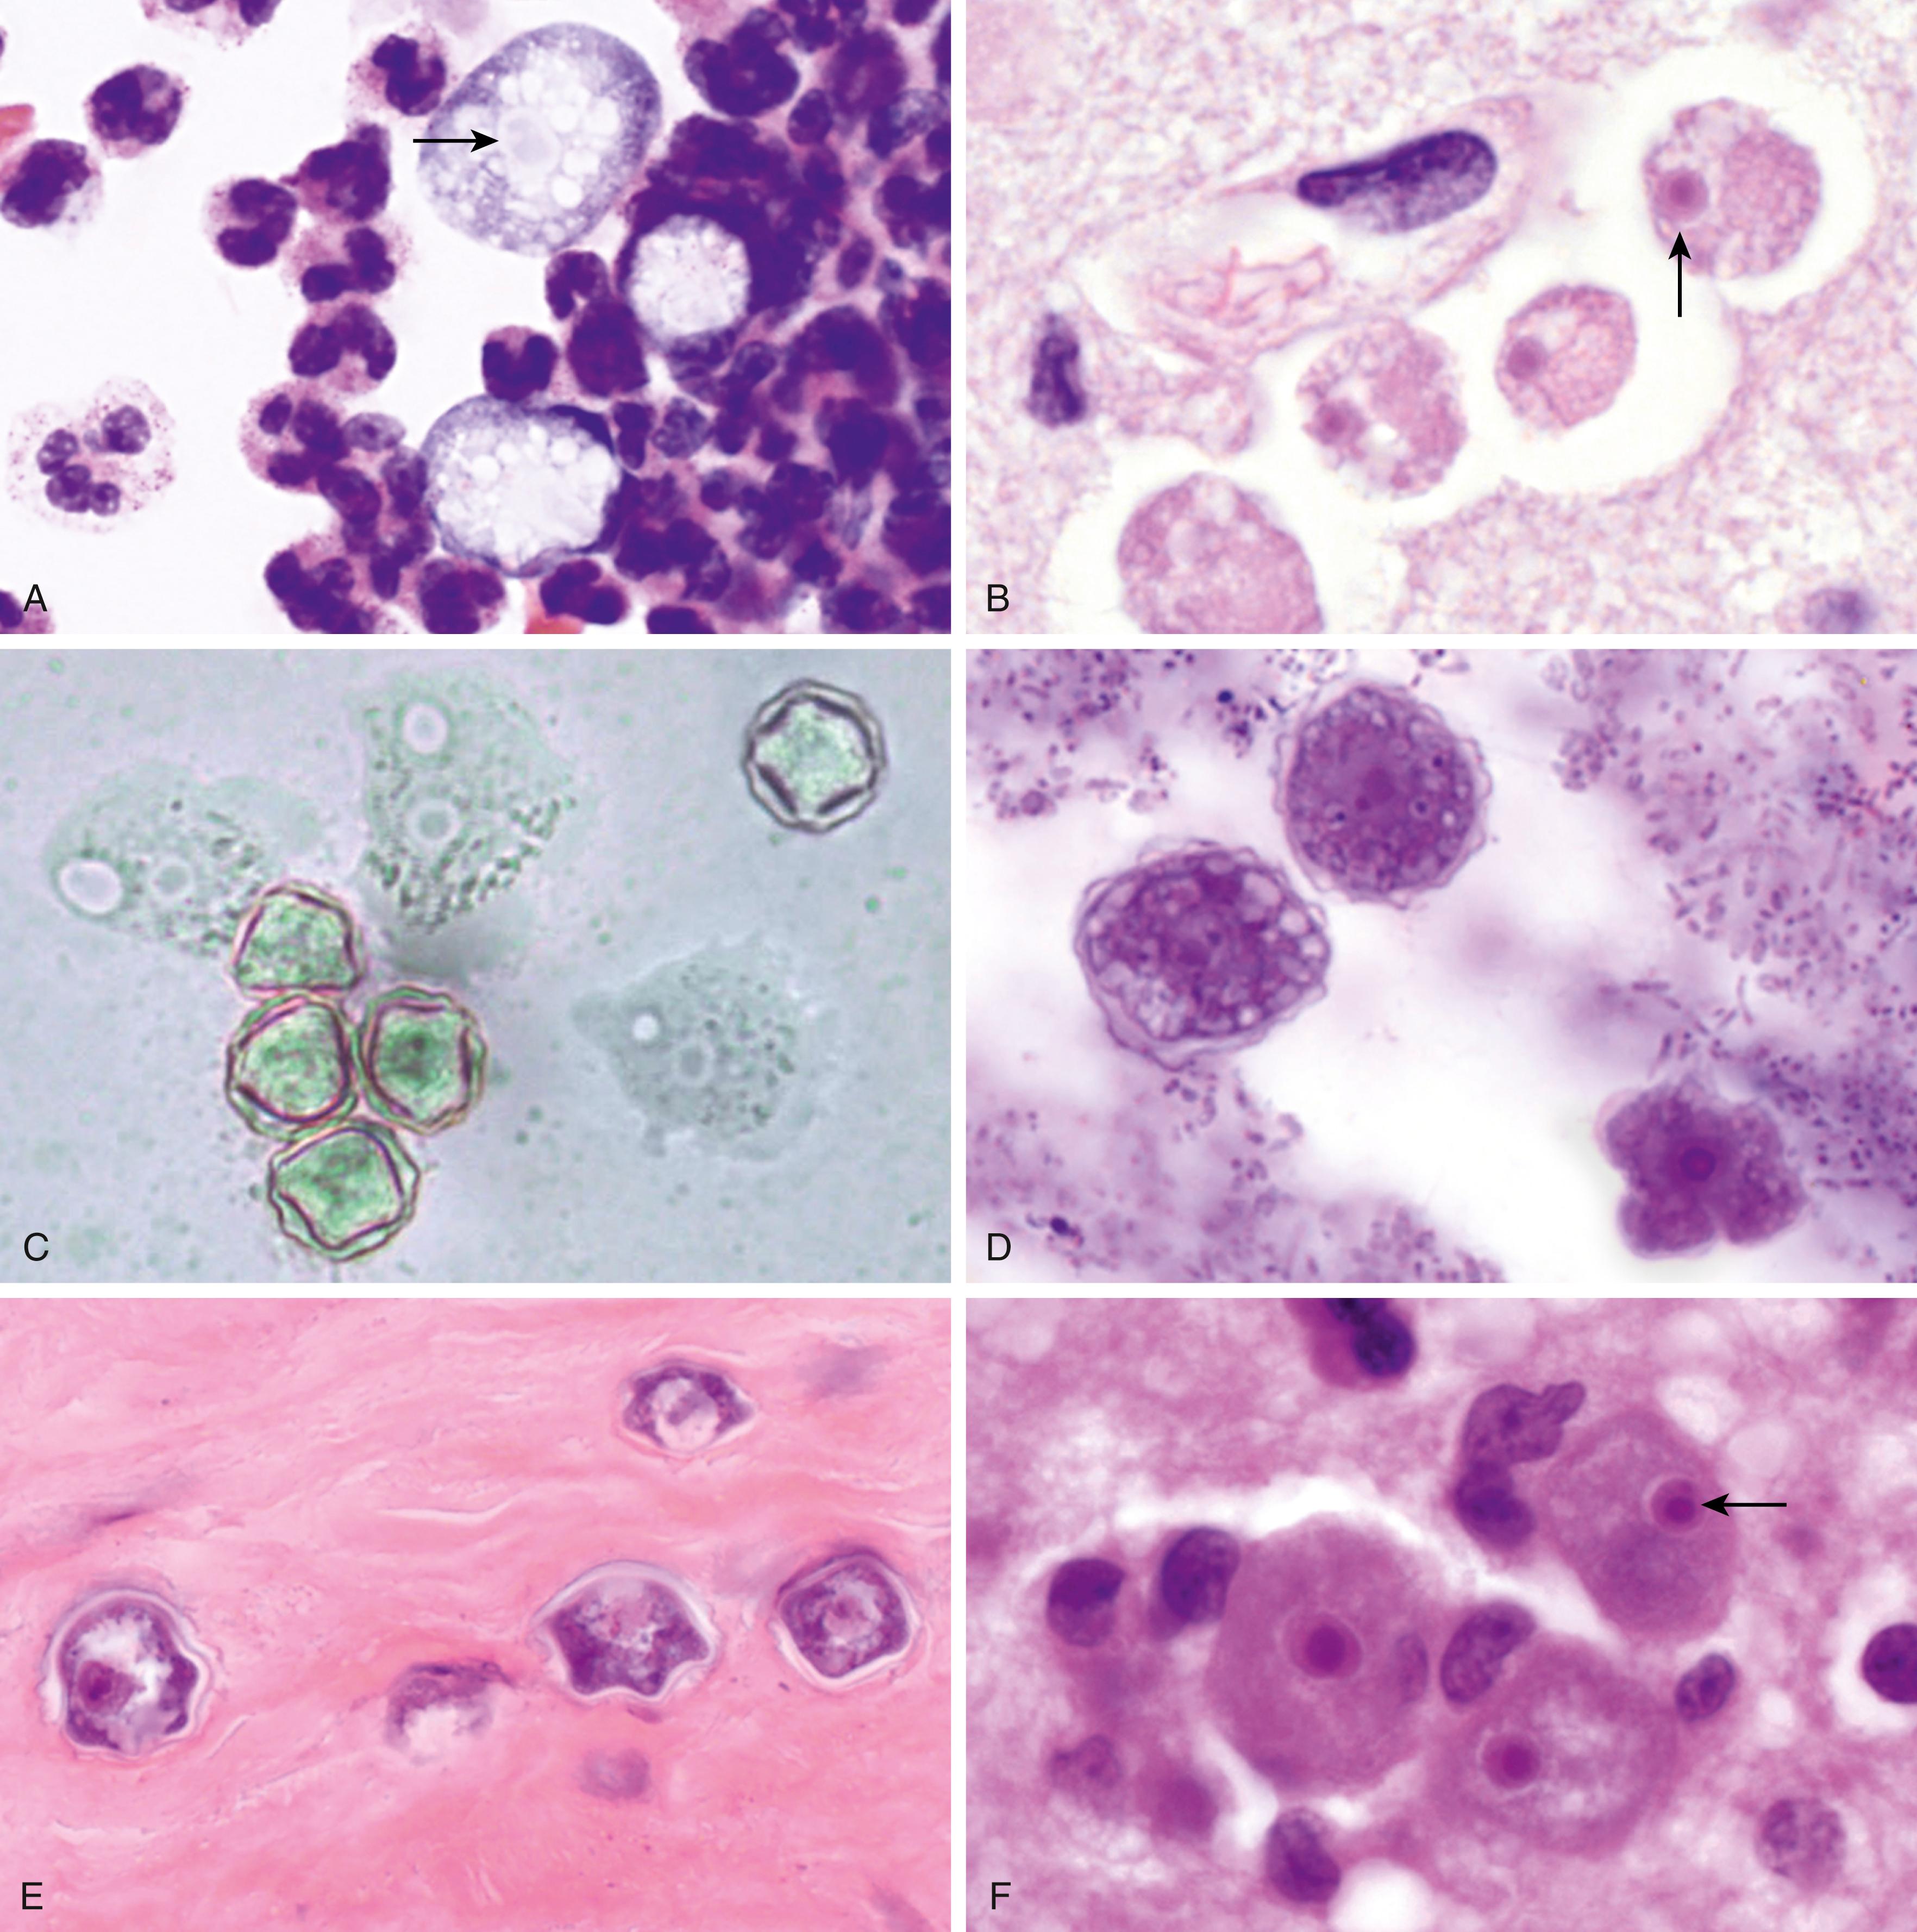 Figure 65.8, A, Naegleria fowleri trophozoites in the cerebrospinal fluid in a case of primary amebic meningoencephalitis (PAM). Note the pale nucleus with large karyosome (arrow) (Giemsa; 1000×). B, Naegleria fowleri trophozoites in an H&E-stained brain section in a case of PAM; note the small nucleus with large central karyosome (arrow) (1000×). C, Acanthamoeba sp. trophozoites and cysts on an agar culture (1000×). D, Acanthamoeba sp. cysts (left) and trophozoite (right) in contact lens fluid in a case of acanthamebic keratitis. There are abundant bacteria also present (H&E; 1000×). E, Double-walled cysts of Acanthamoeba sp. within corneal stroma (H&E; 1000×). F, Trophozoites in brain tissue in a case of Balamuthia mandrillaris granulomatous amebic encephalitis. The small nucleus with central large karyosome is highlighted (arrow) (H&E; 400×).